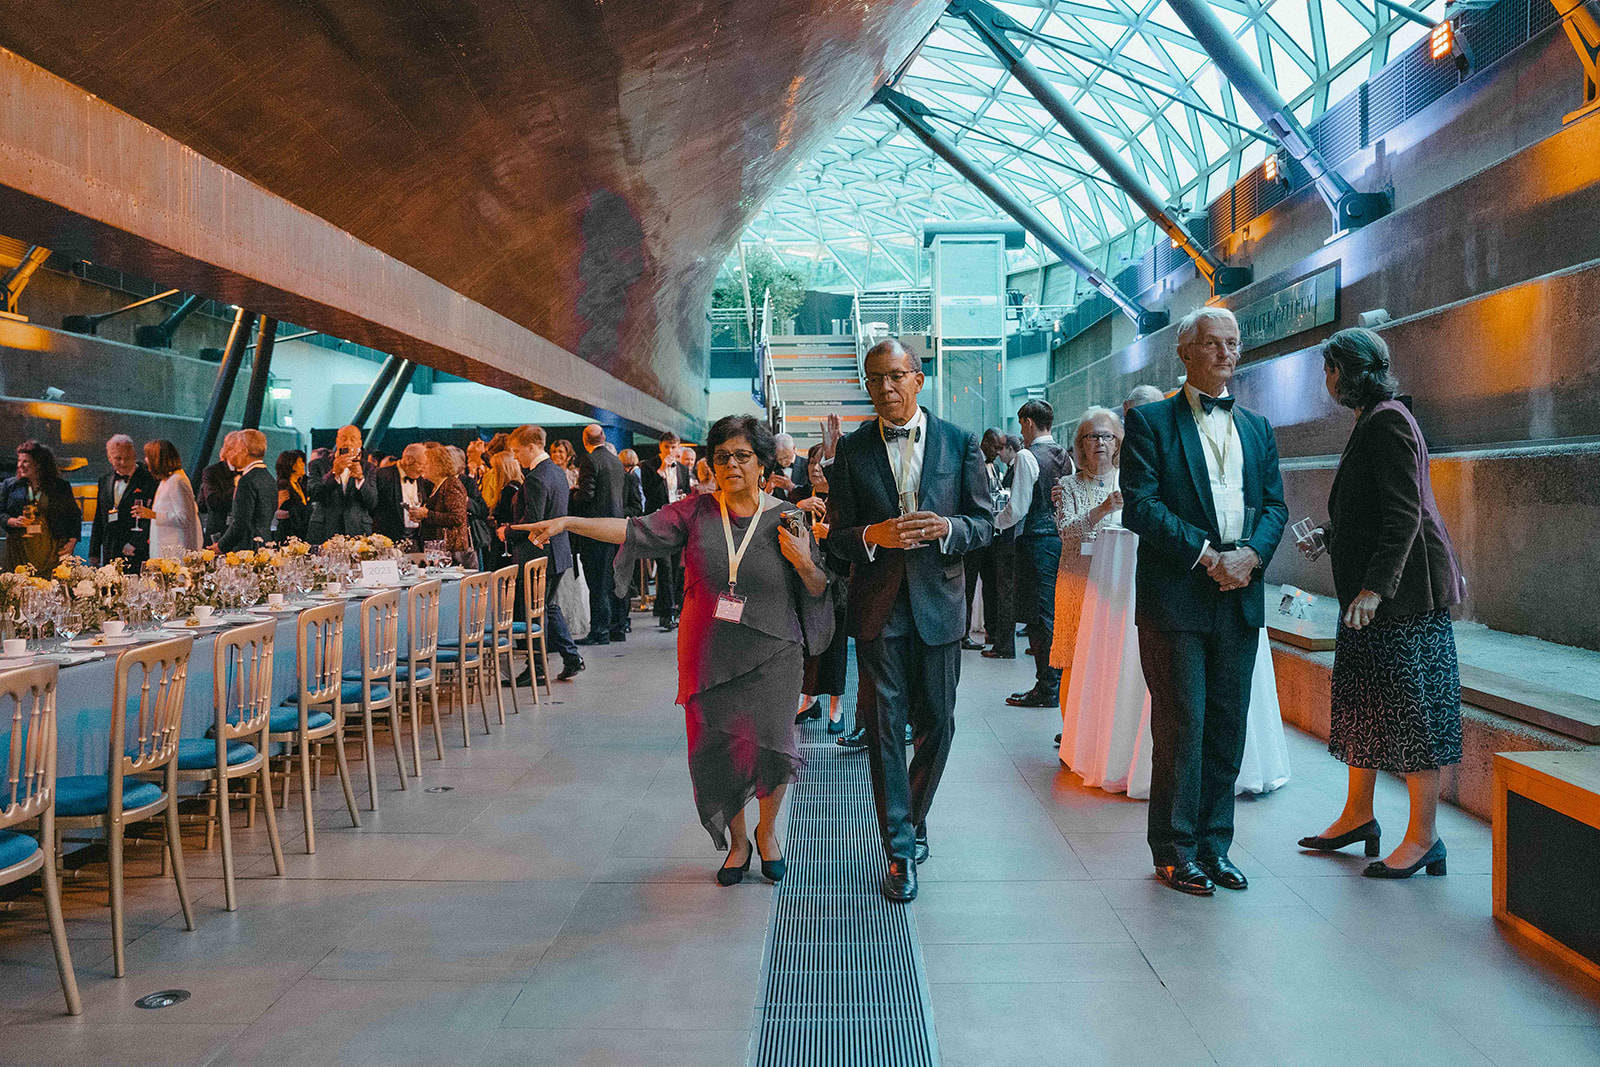 Alumni and Scholars enter the great hall beneath the Cutty Sark and look for their seats.